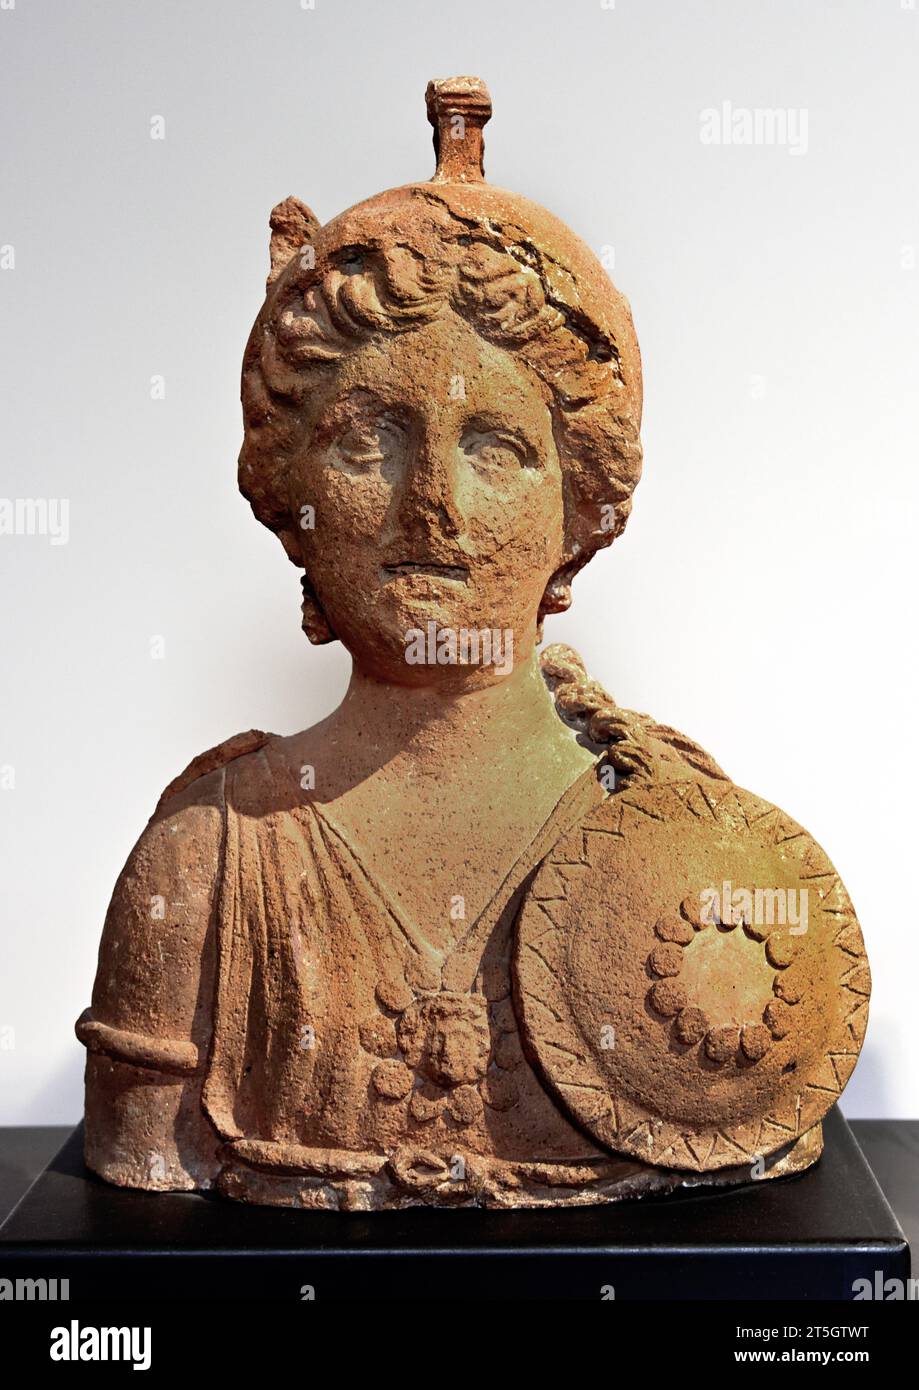 Armed Goddess - Belona the Goddess of war worshipped in Rome at the Temple of Apollo Sosianus 1st Century AD                                 National Archaeological Museum of Naples Italy. ( Bellona was originally an ancient Sabine goddess of war identified with Nerio, the consort of the war god Mars ) Stock Photo